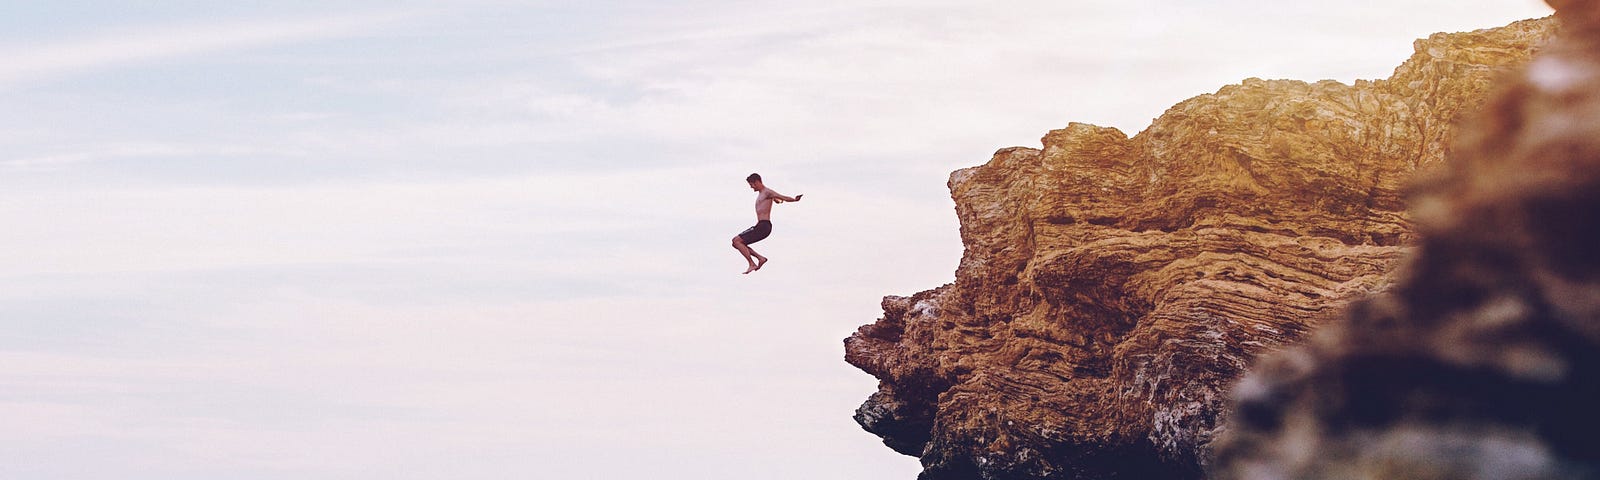 a brave man jumps from a tall cliff into the ocean